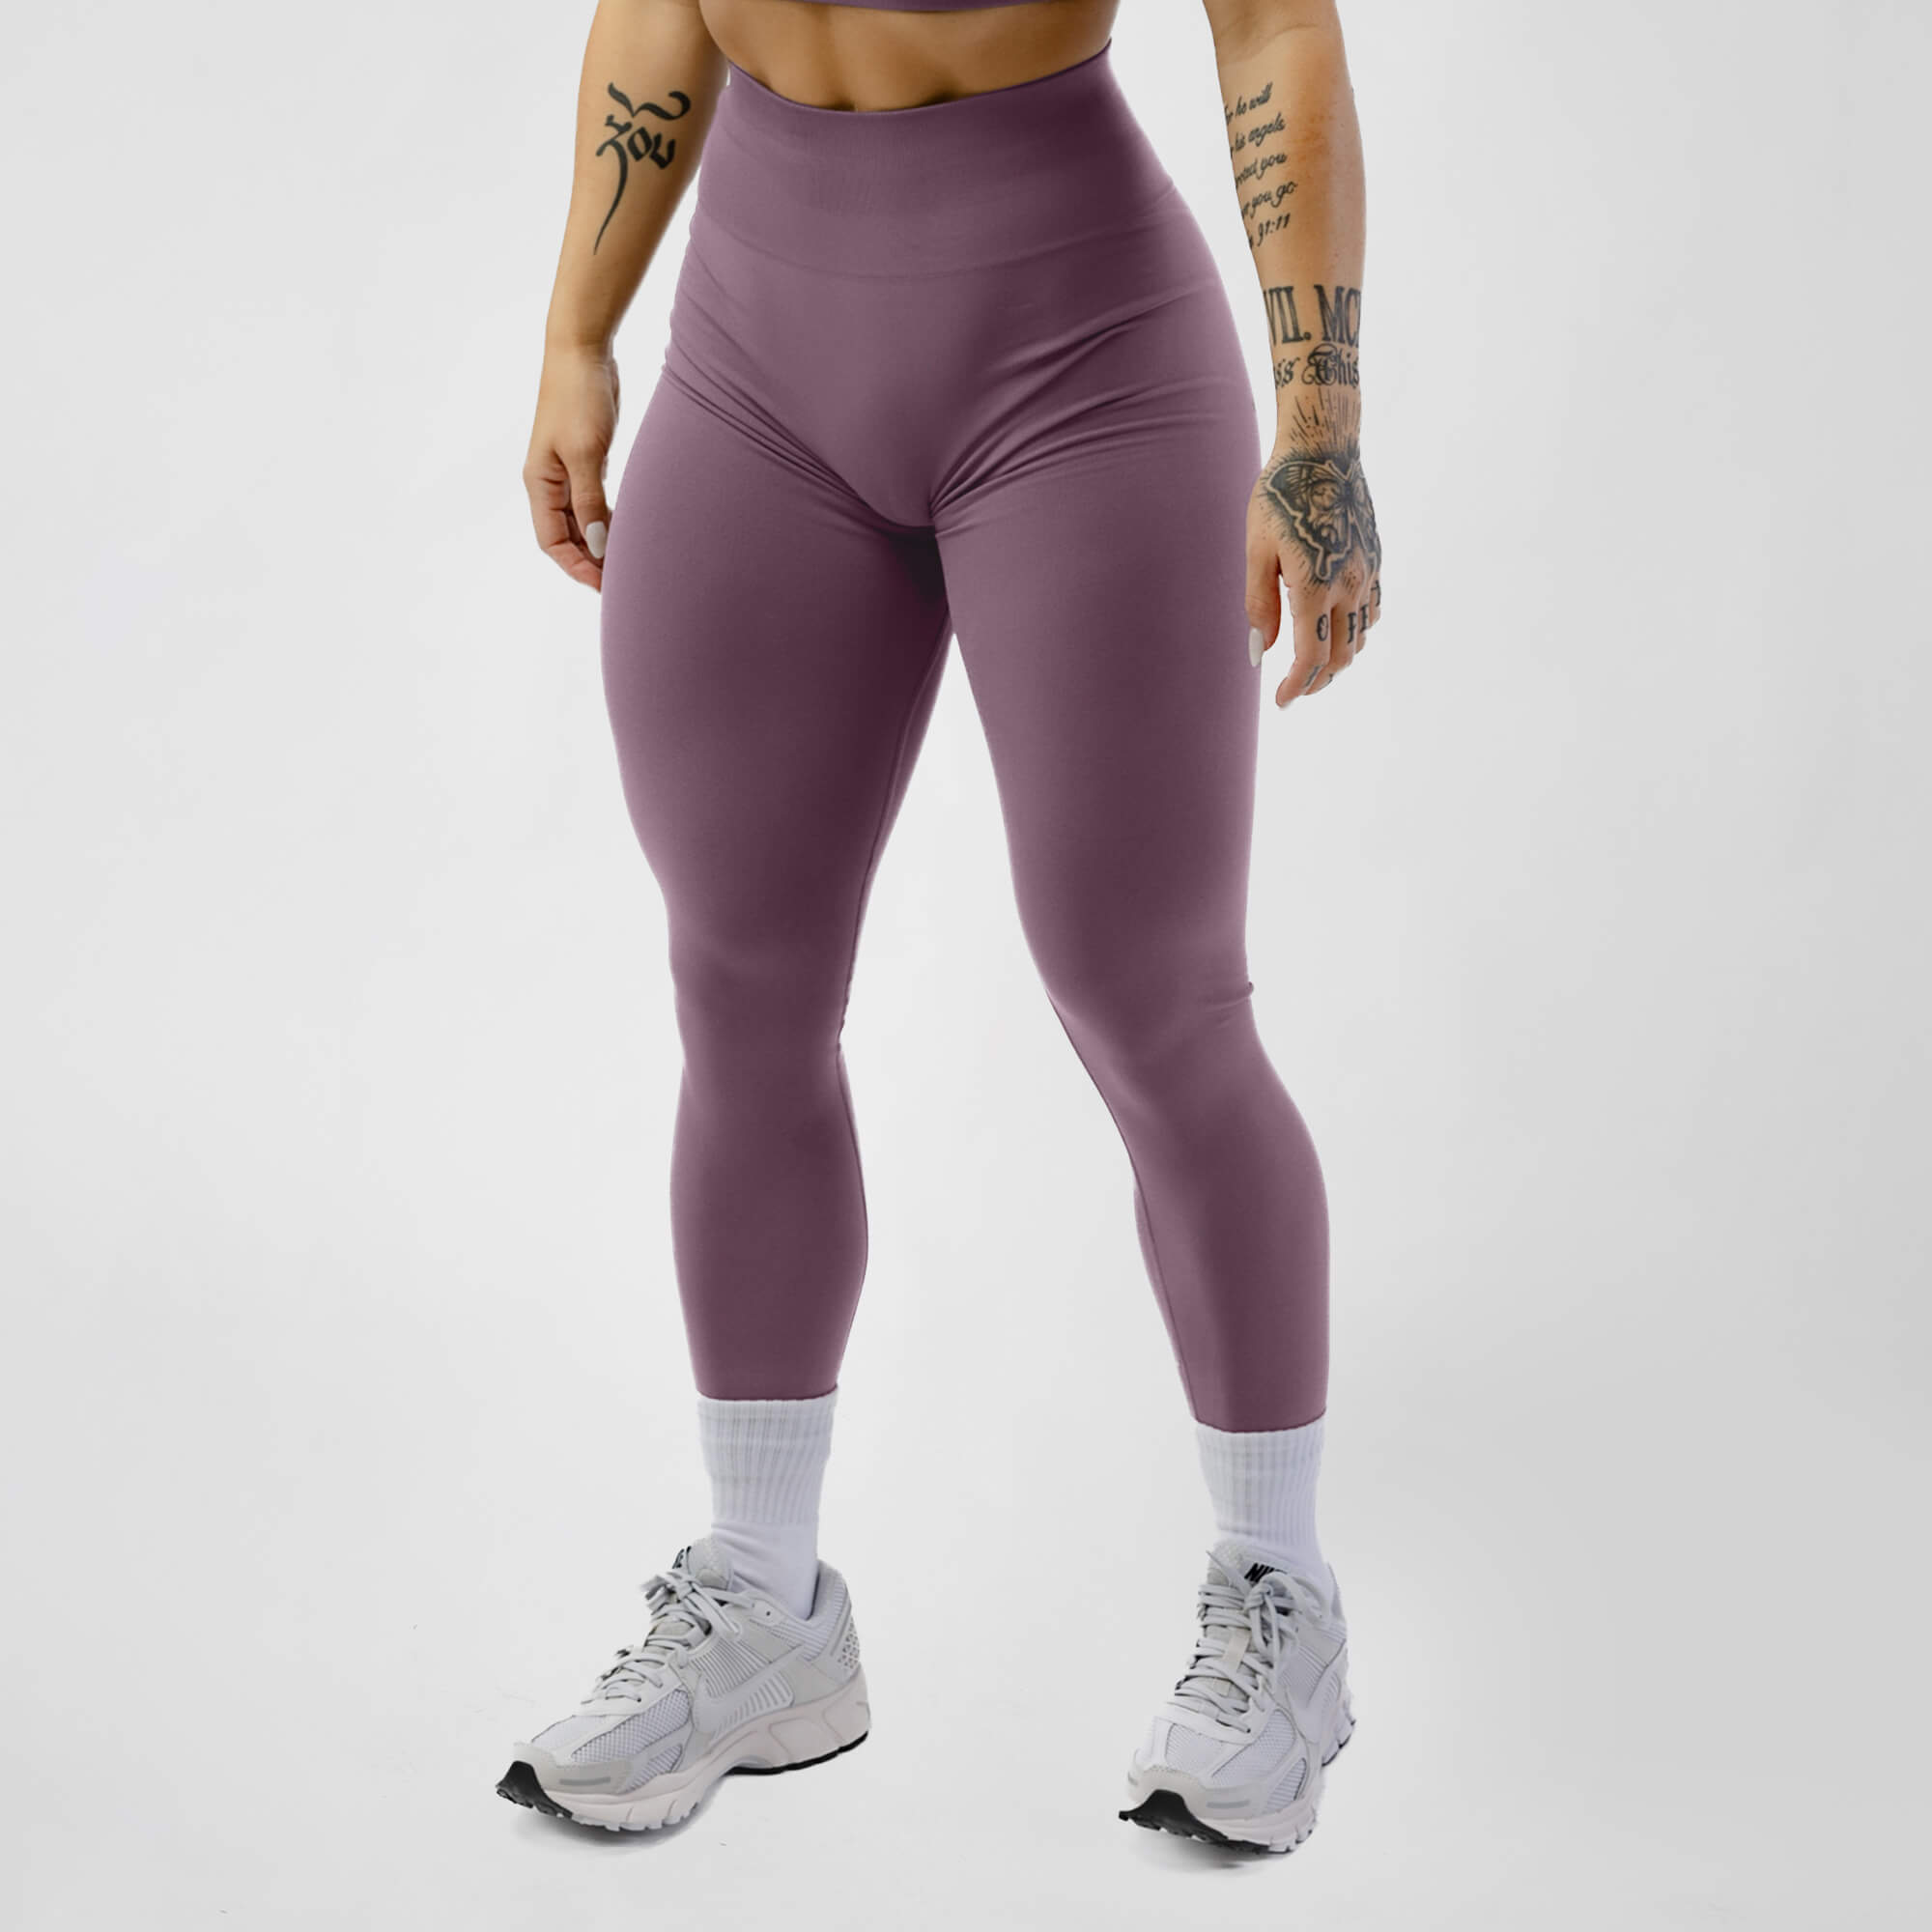 Womens compression leggings Under Armour ARMOUR EVOLVED GRPHC